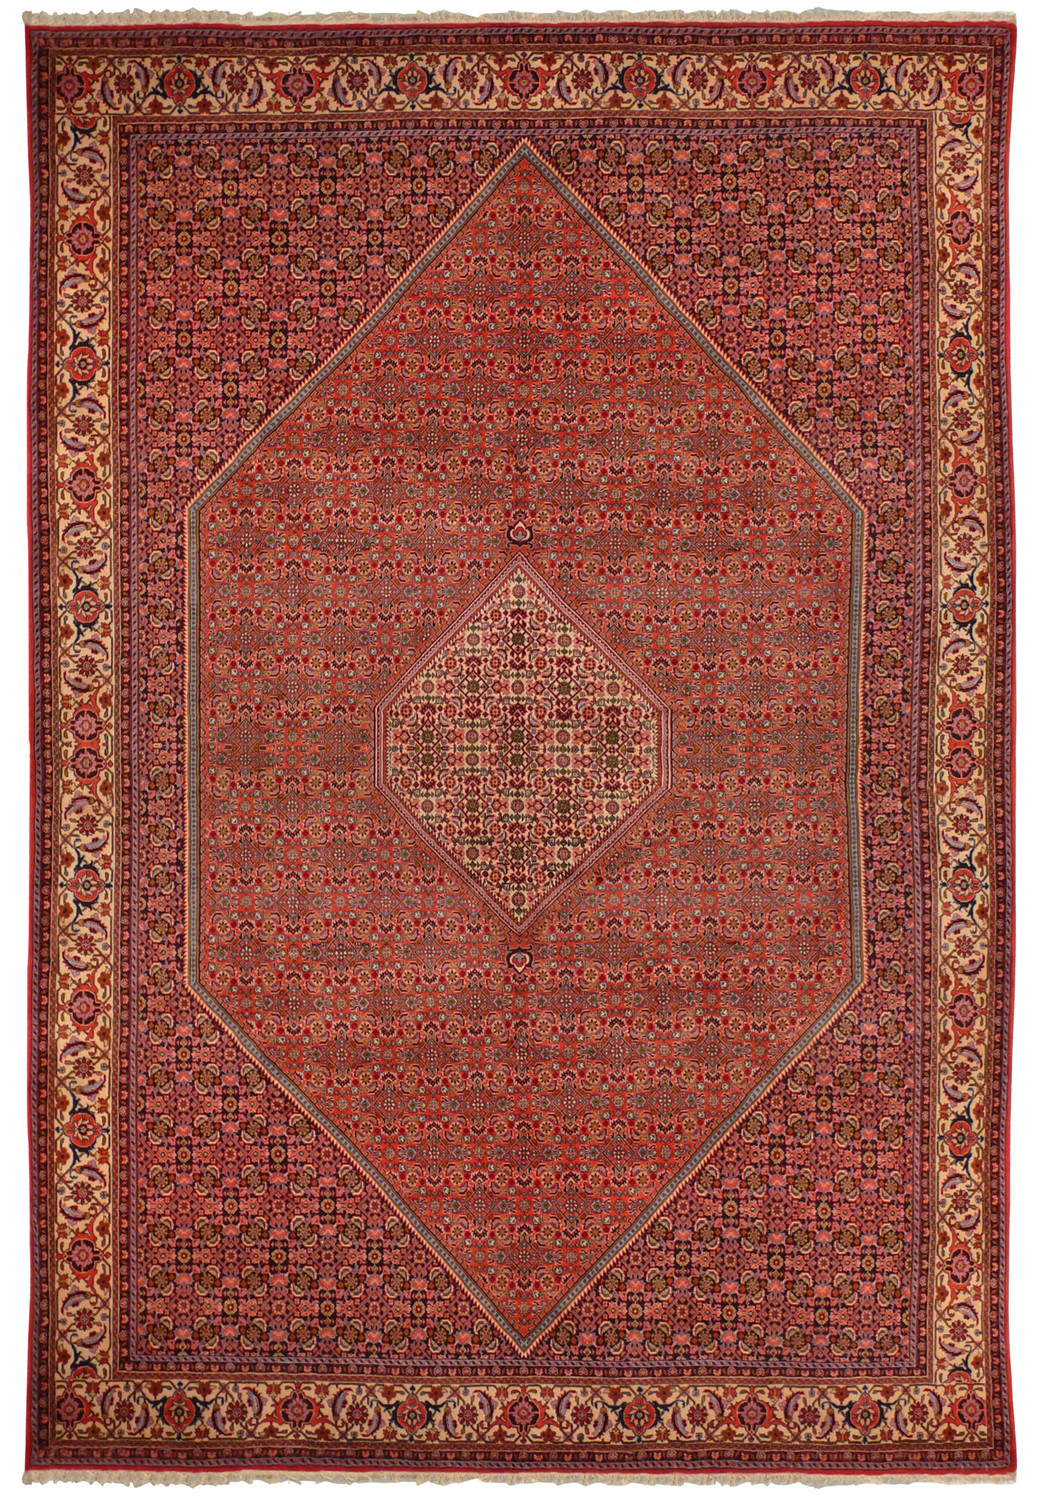 An 8'3" x 11'5" Persian Bijar Iron Rug laid out flat, displaying an array of intricate floral patterns and dense knotting in rich reds, blues, and creams, with a prominent central diamond medallion and wide, decorative borders.